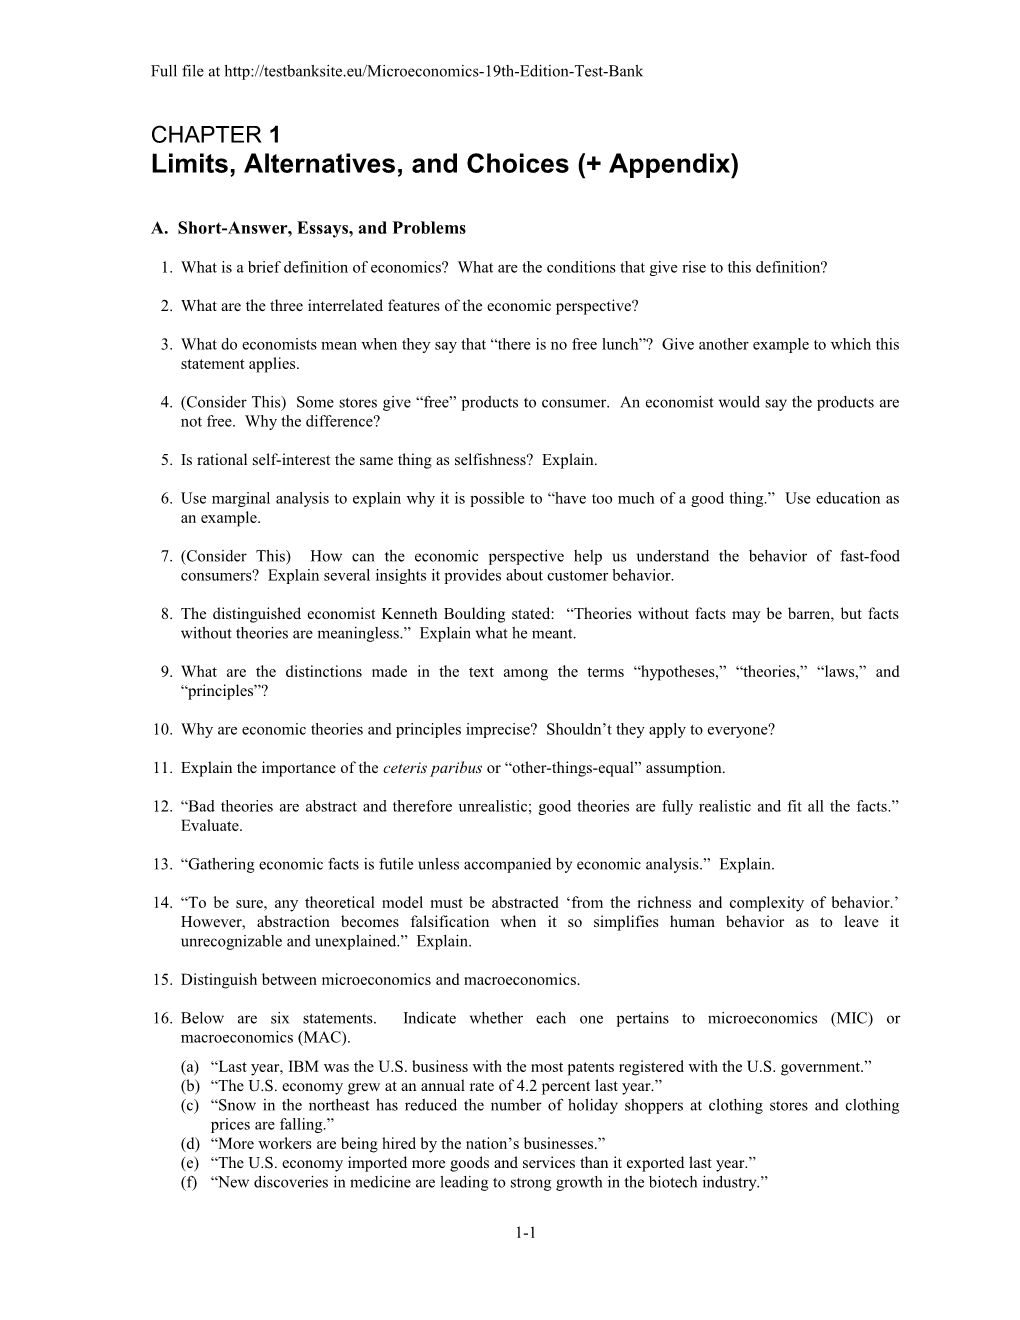 Limits, Alternatives, and Choices (+ Appendix)